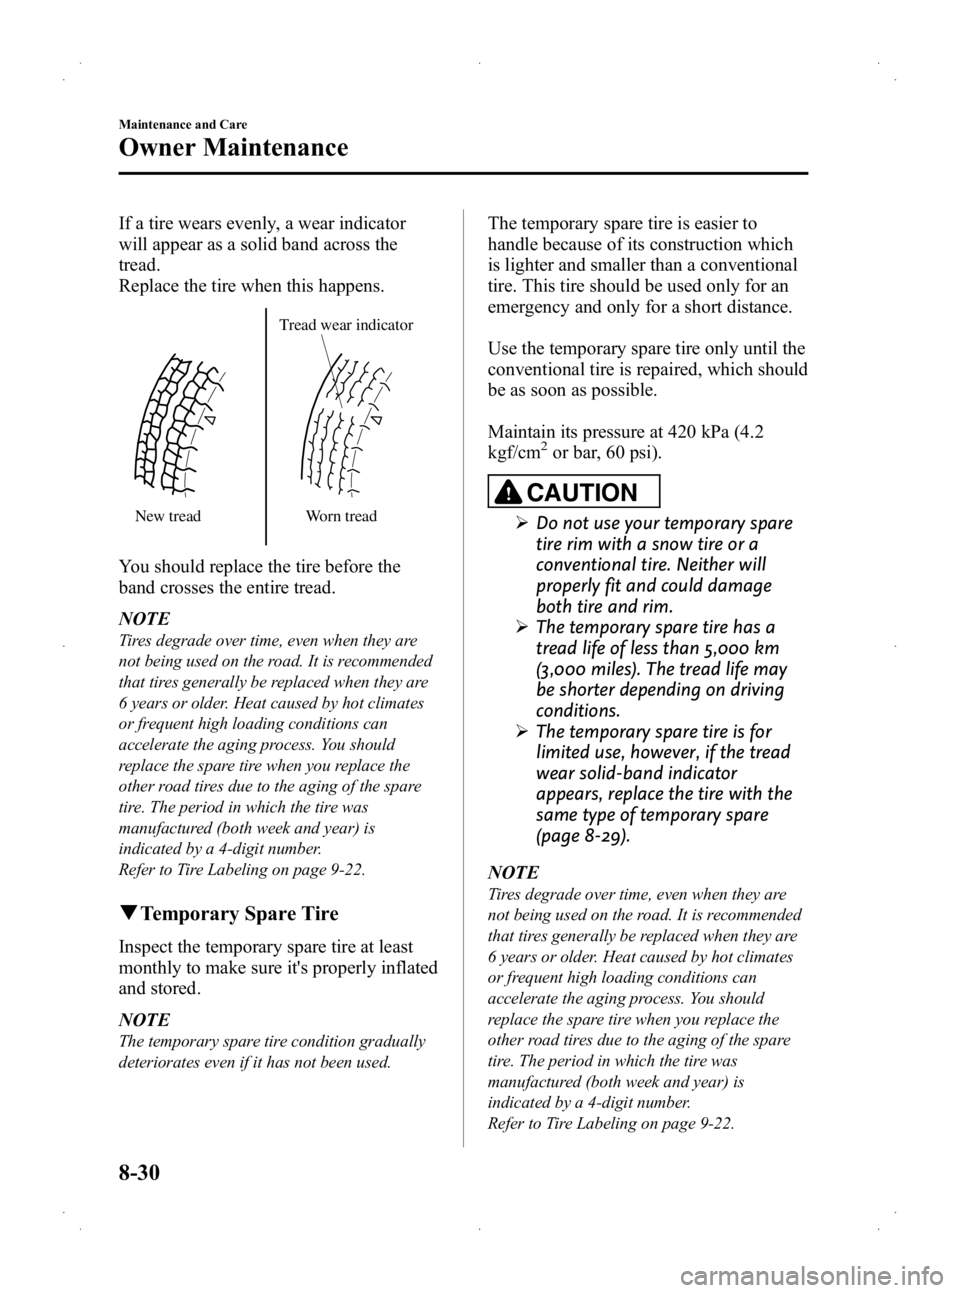 MAZDA MODEL 2 2013  Owners Manual Black plate (274,1)
If a tire wears evenly, a wear indicator
will appear as a solid band across the
tread.
Replace the tire when this happens.
New treadTread wear indicator
Worn tread
You should repla